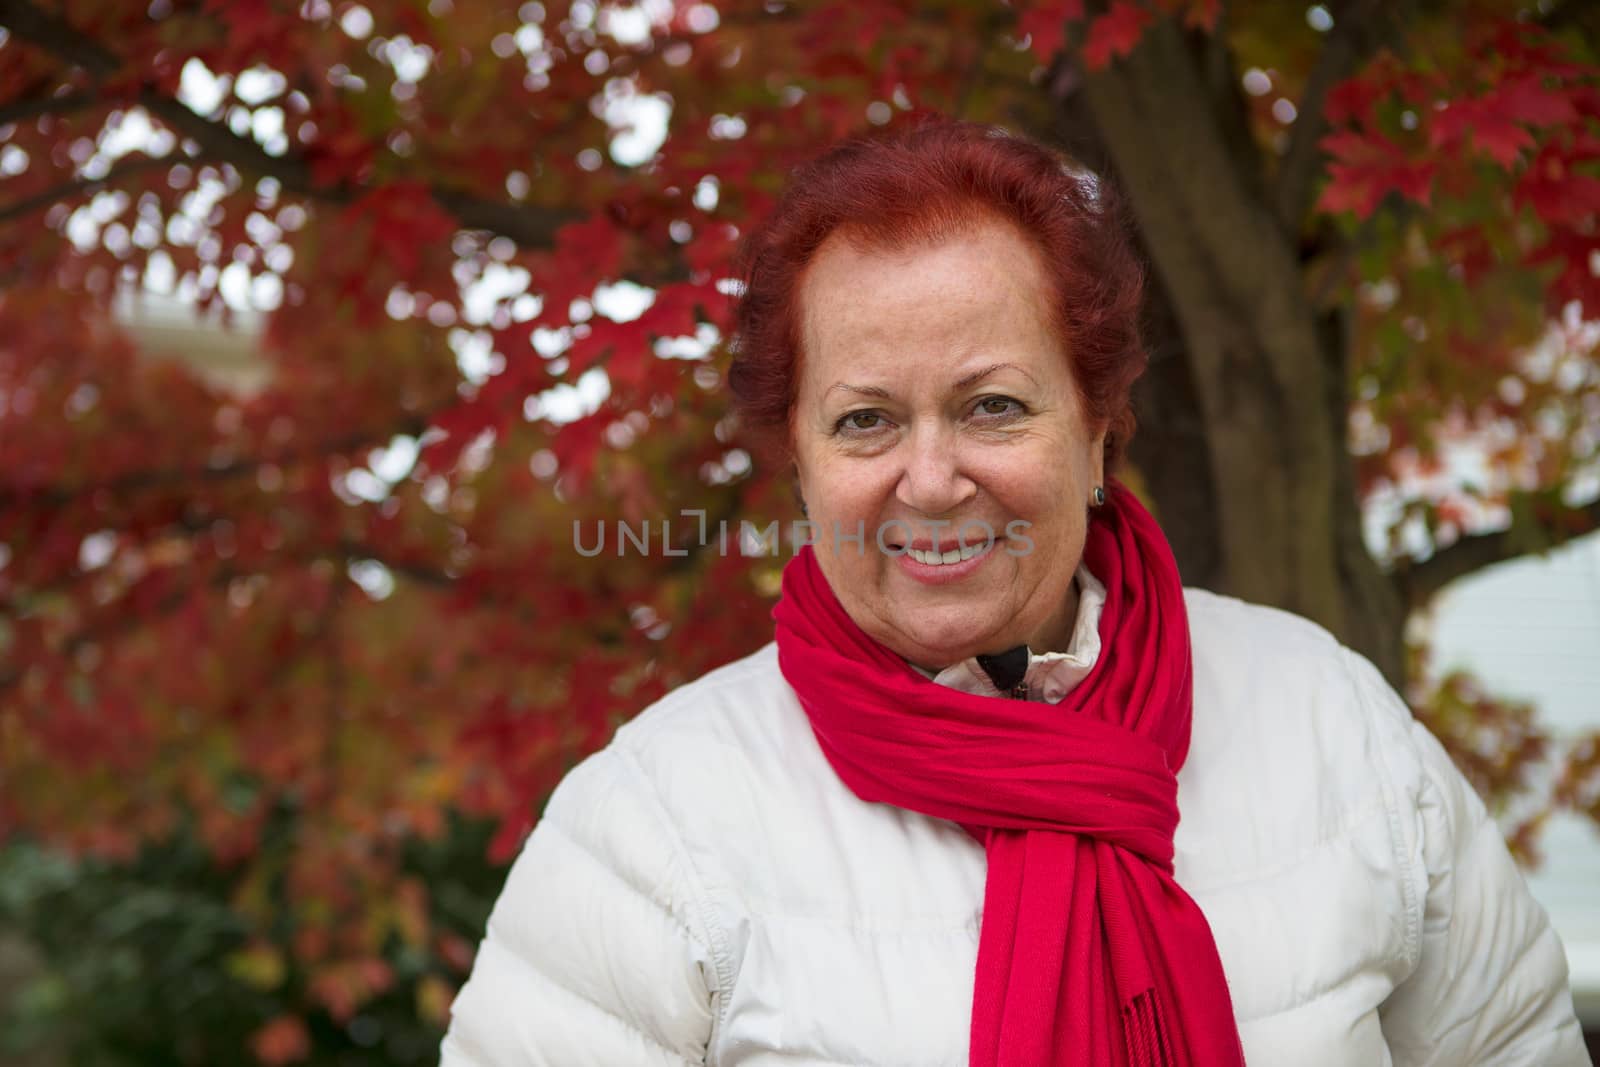 Red hair senior lady looking at you happily and trustfully with her red scarf and white coat under the tree with red falling leaves